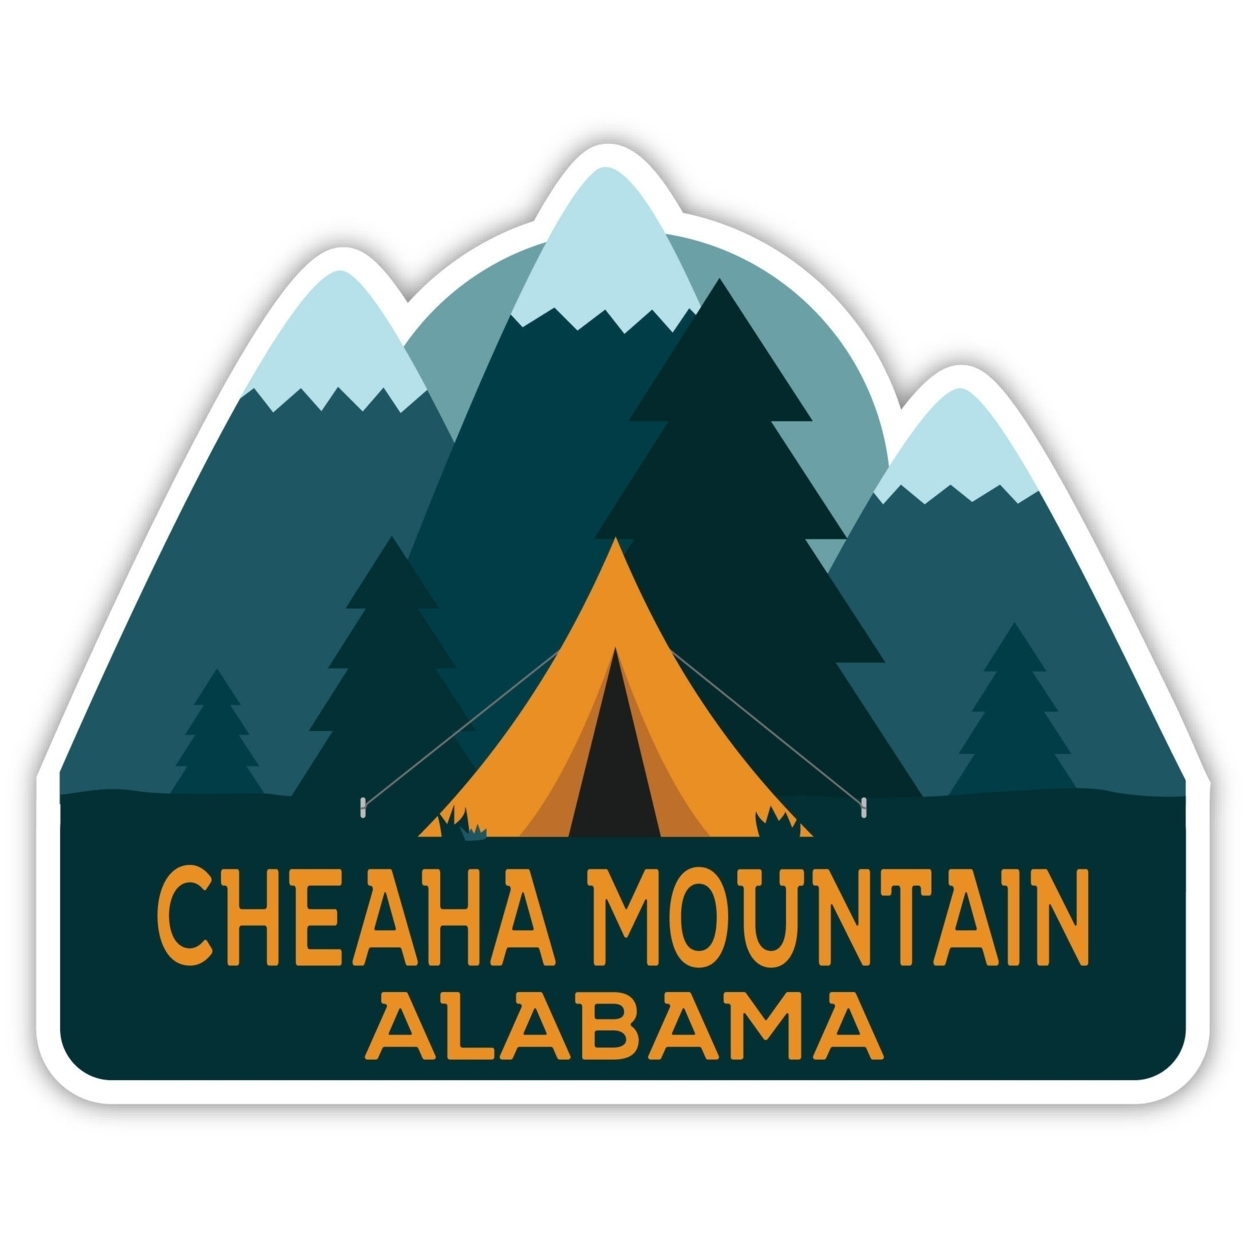 Cheaha Mountain Alabama Souvenir Decorative Stickers (Choose Theme And Size) - 4-Pack, 6-Inch, Bear